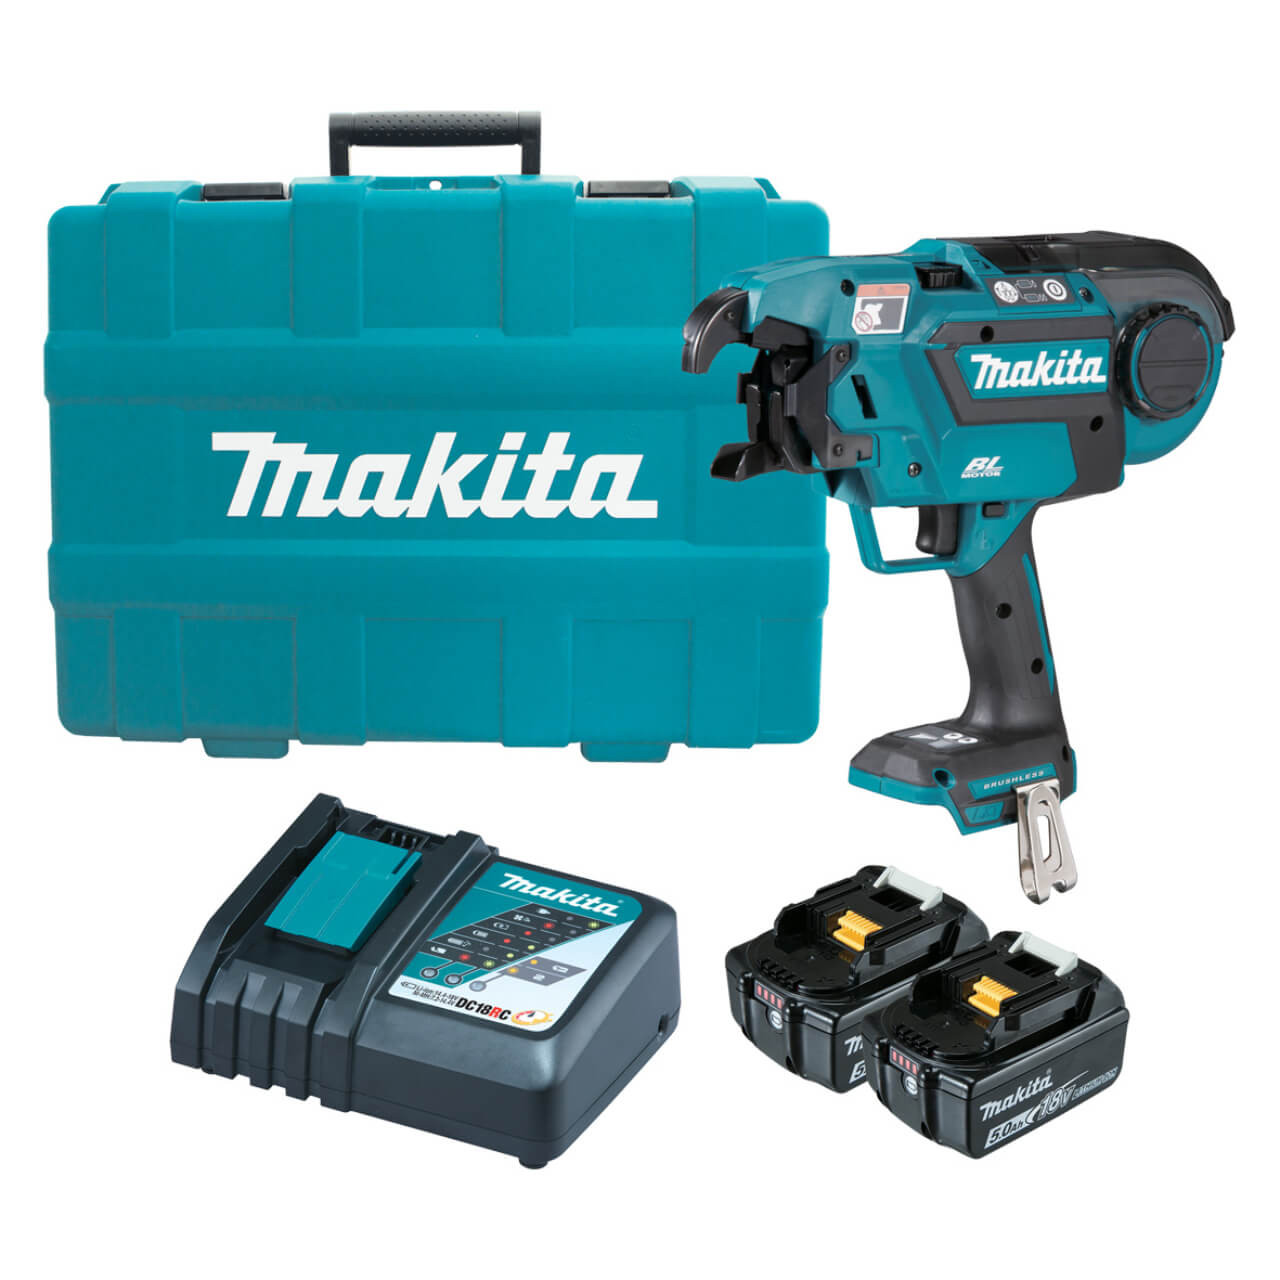 Makita 18V BRUSHLESS Rebar Tying Tool Kit - Includes 2 x 5.0Ah Batteries. Rapid Charger & Carry Case